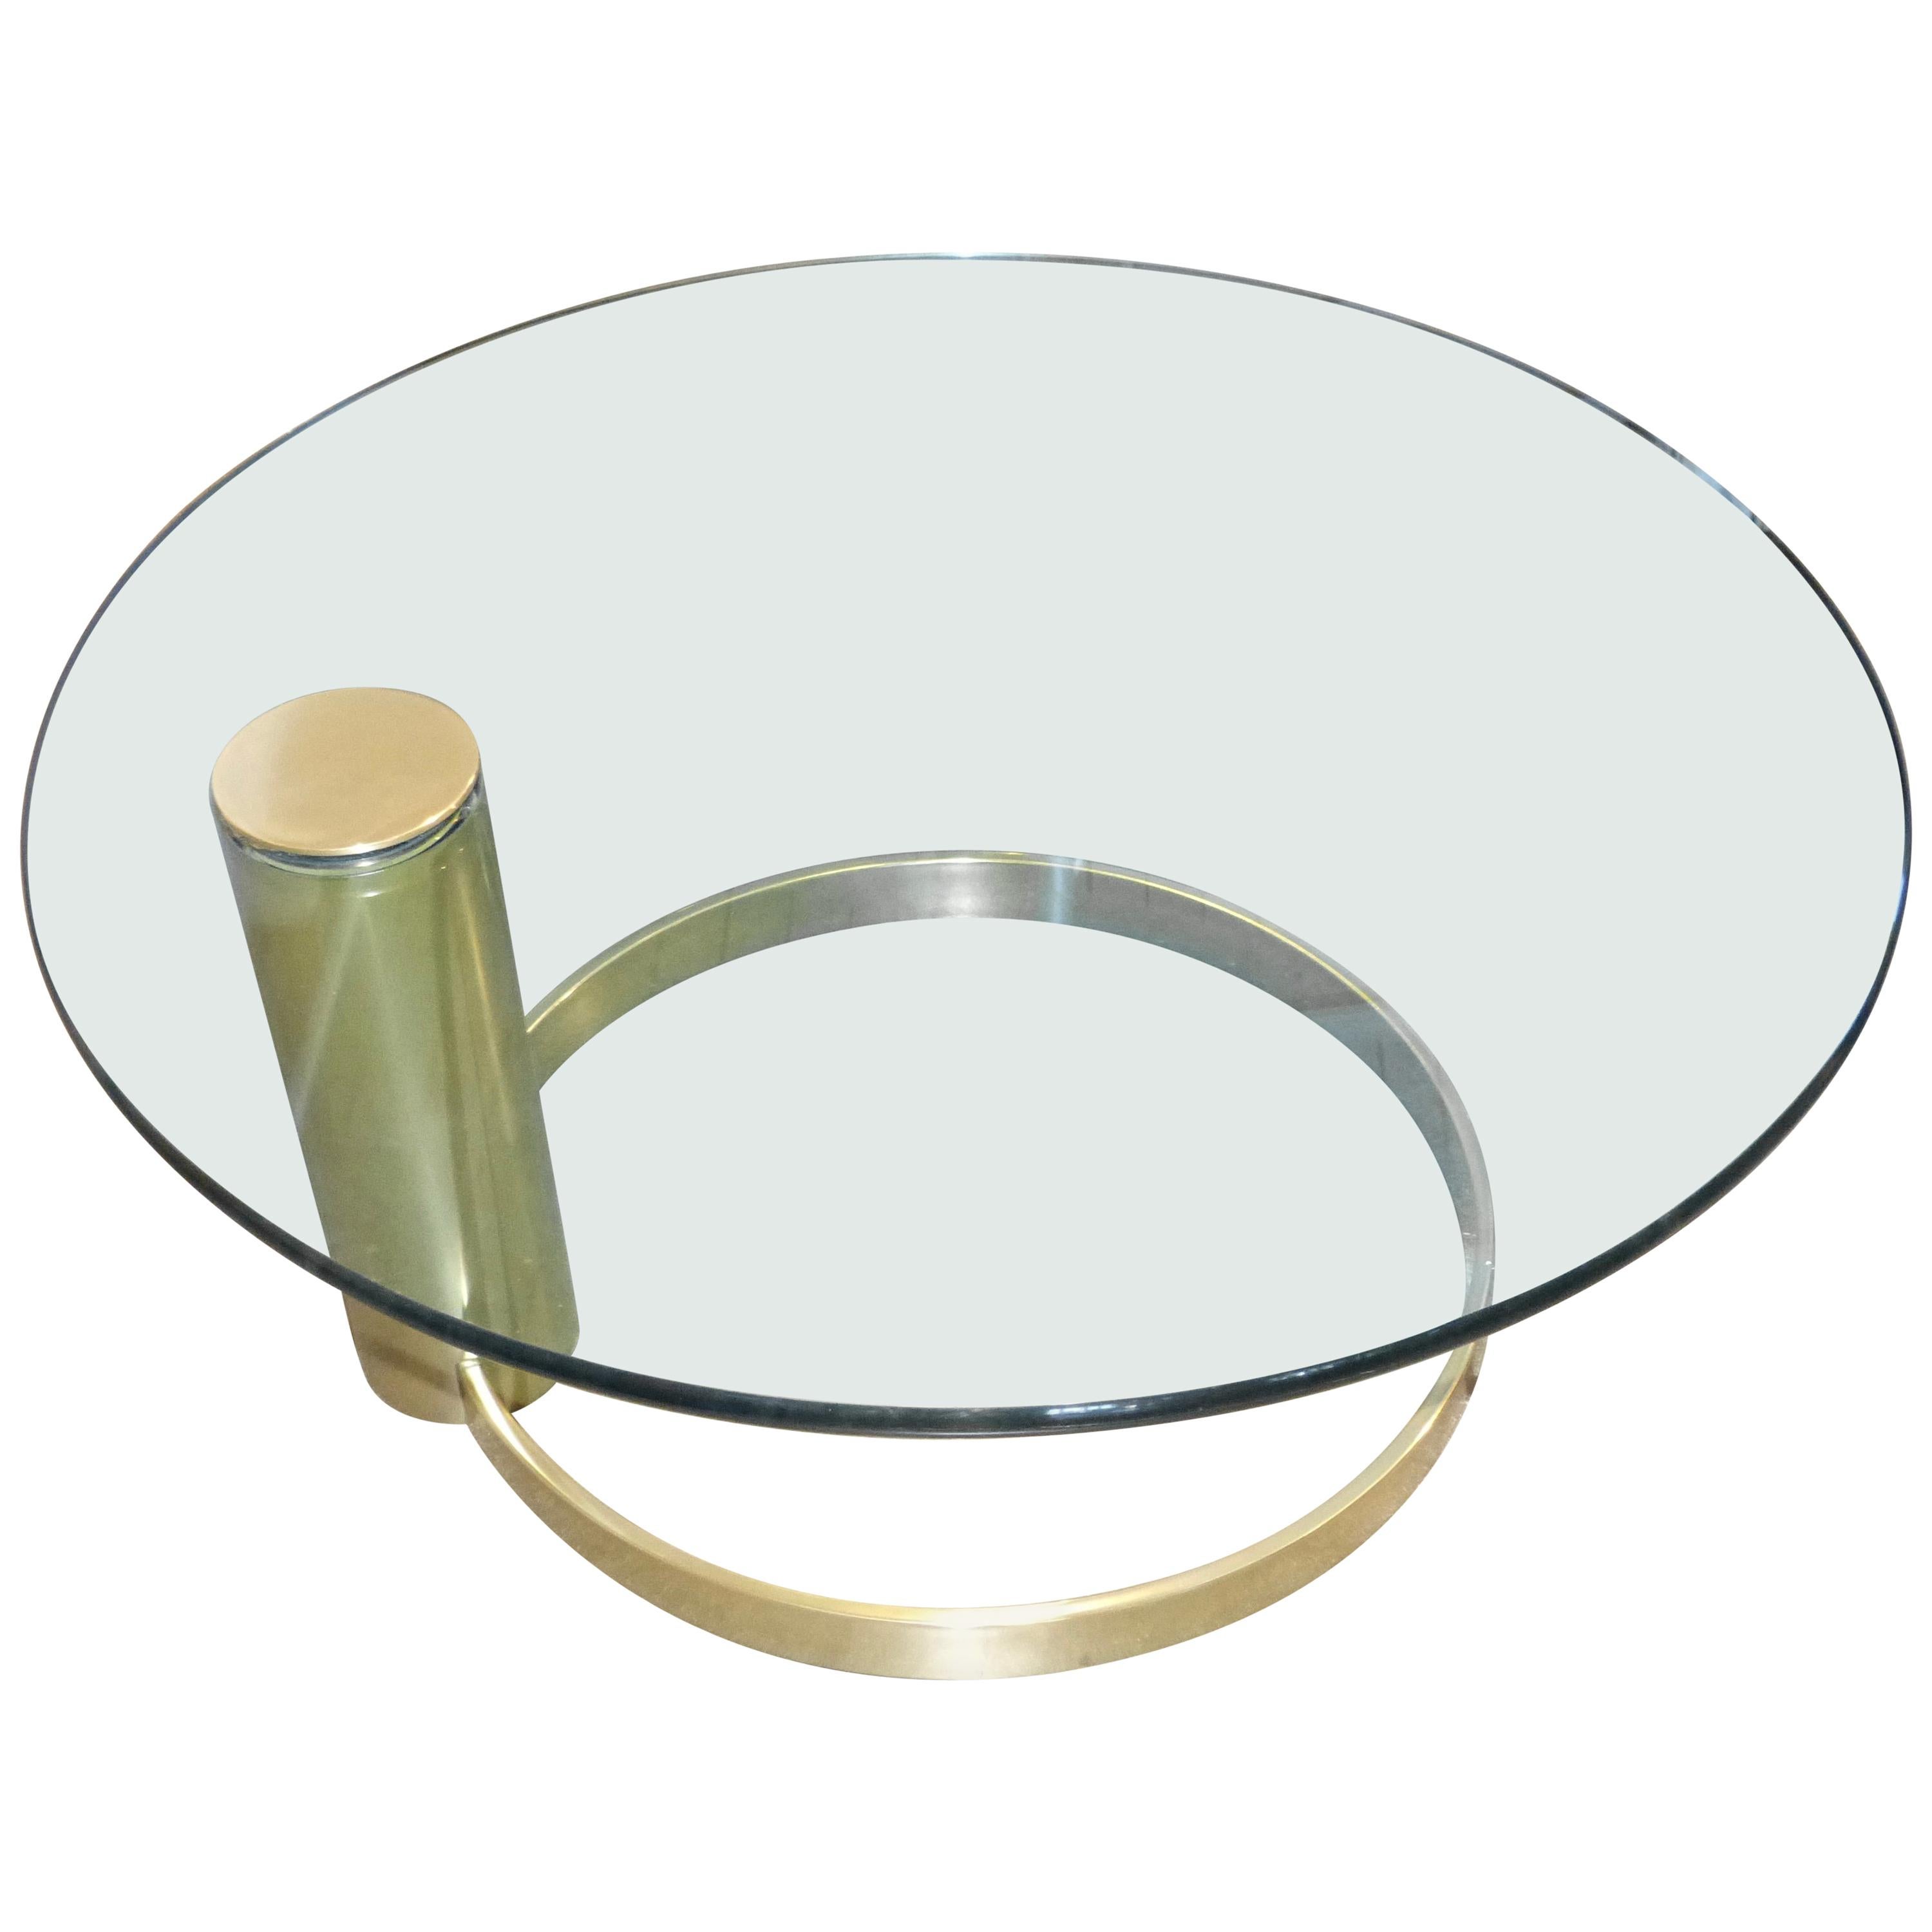 John Mascheroni Cantilevered Coffee Table Coated in Brass